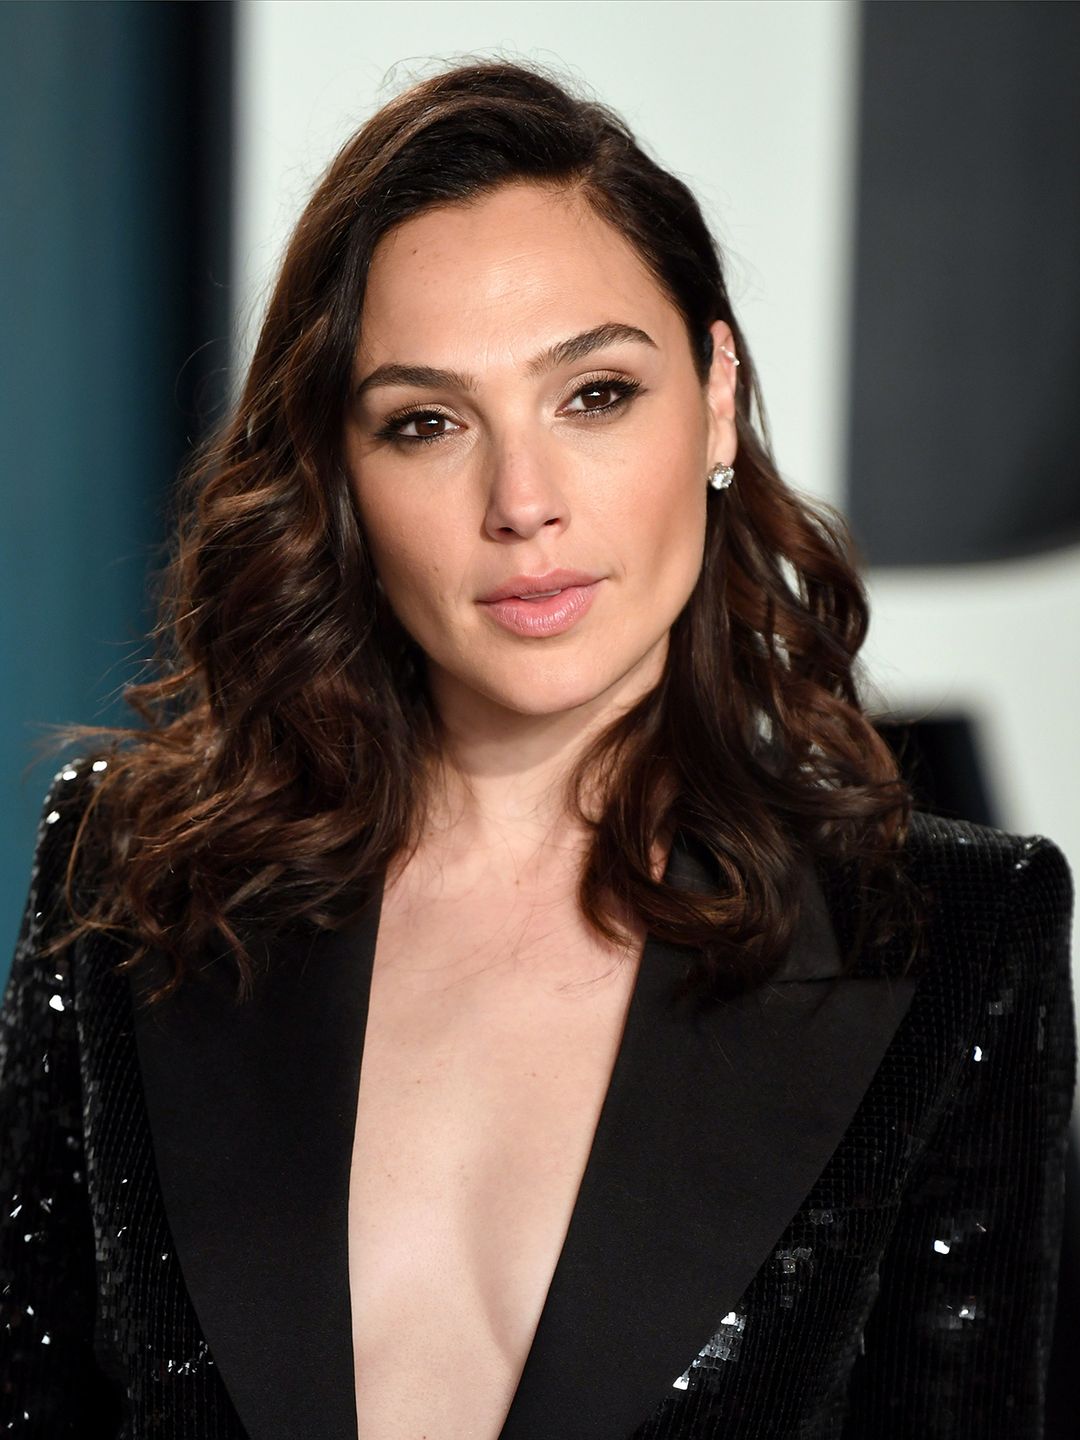 Gal Gadot who is her father